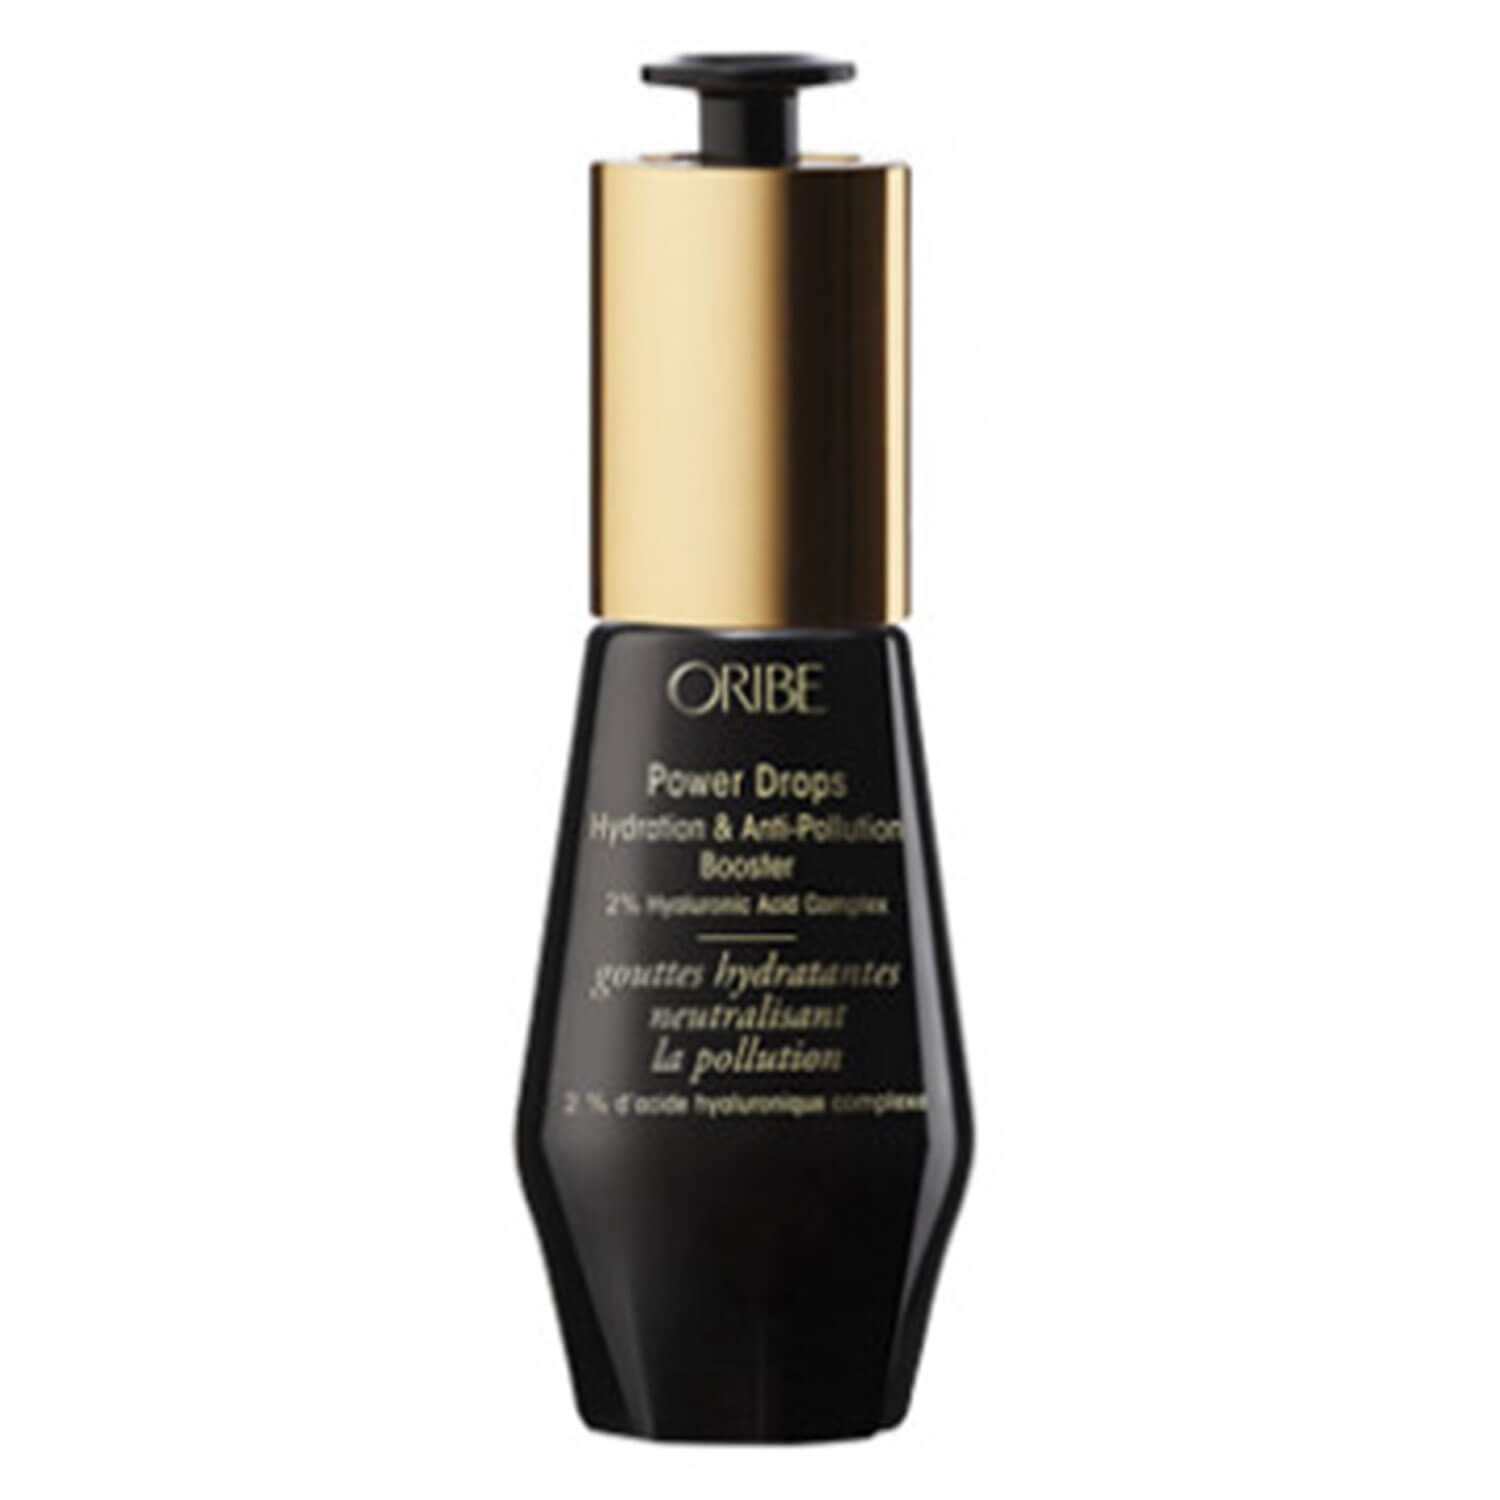 Product image from Oribe Care - Power Drops Hydration & Anti-Pollution Booster